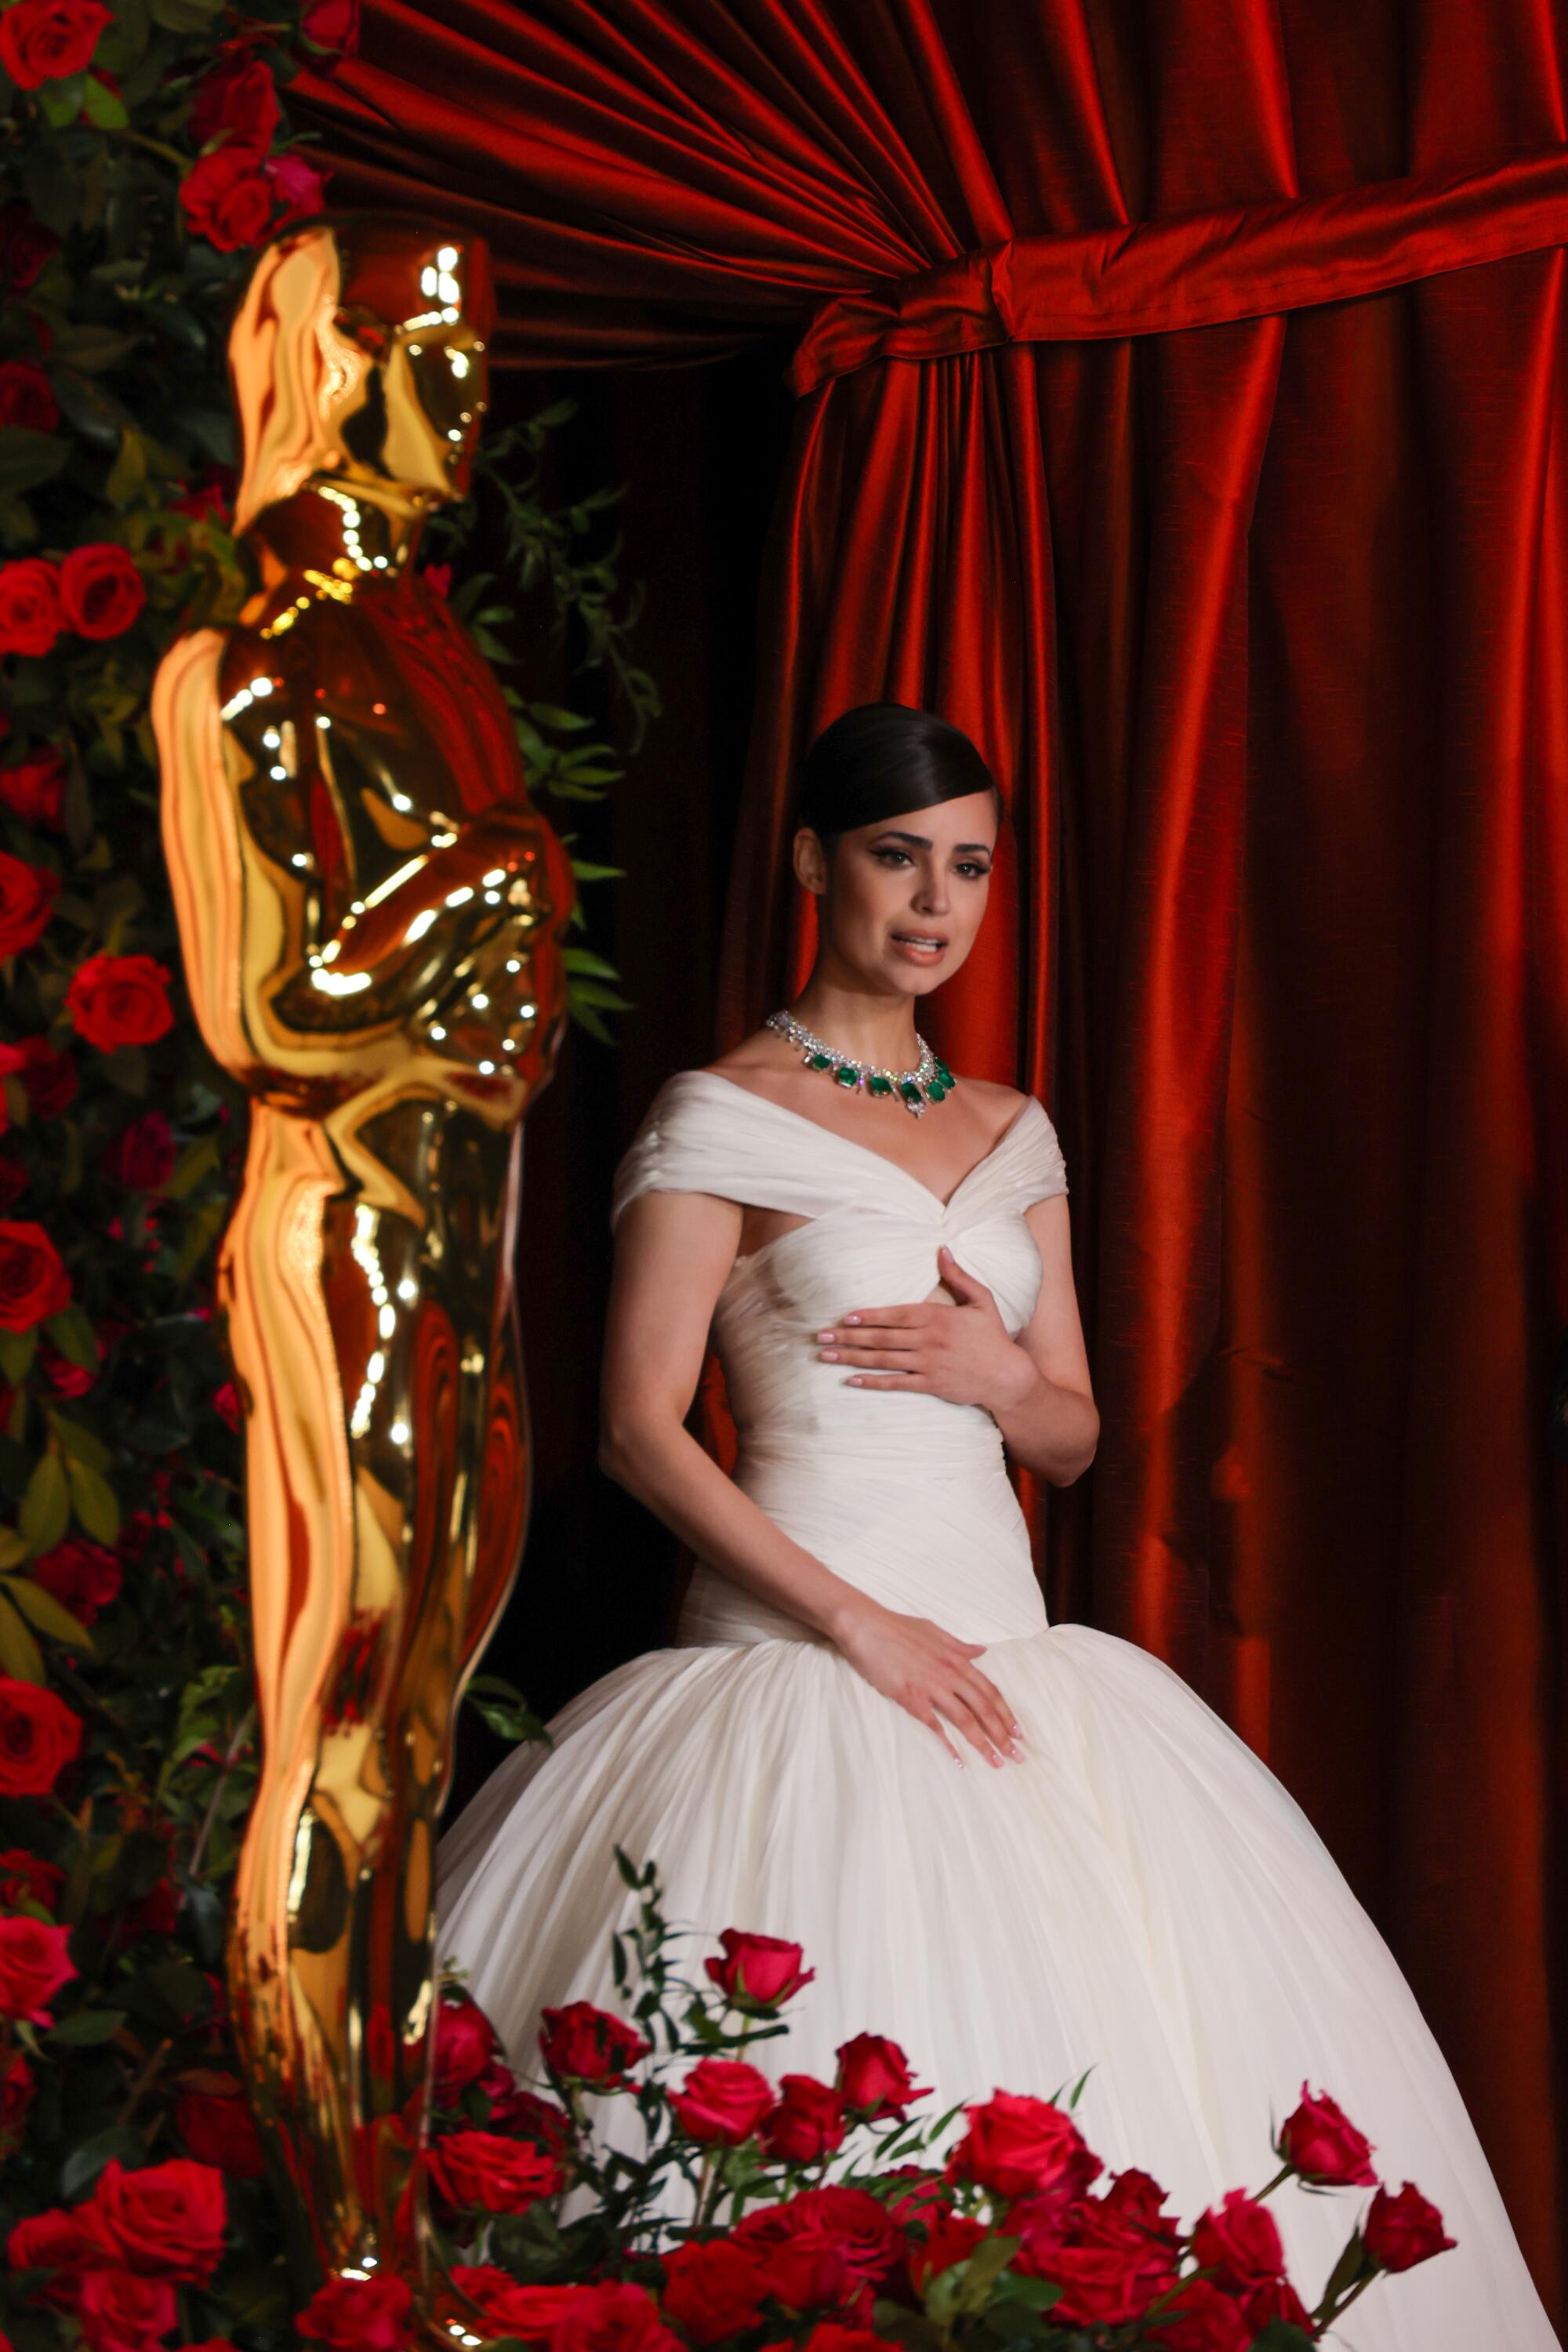 Sofia Carson in a white gown, standing next to a life-size Oscar statue.